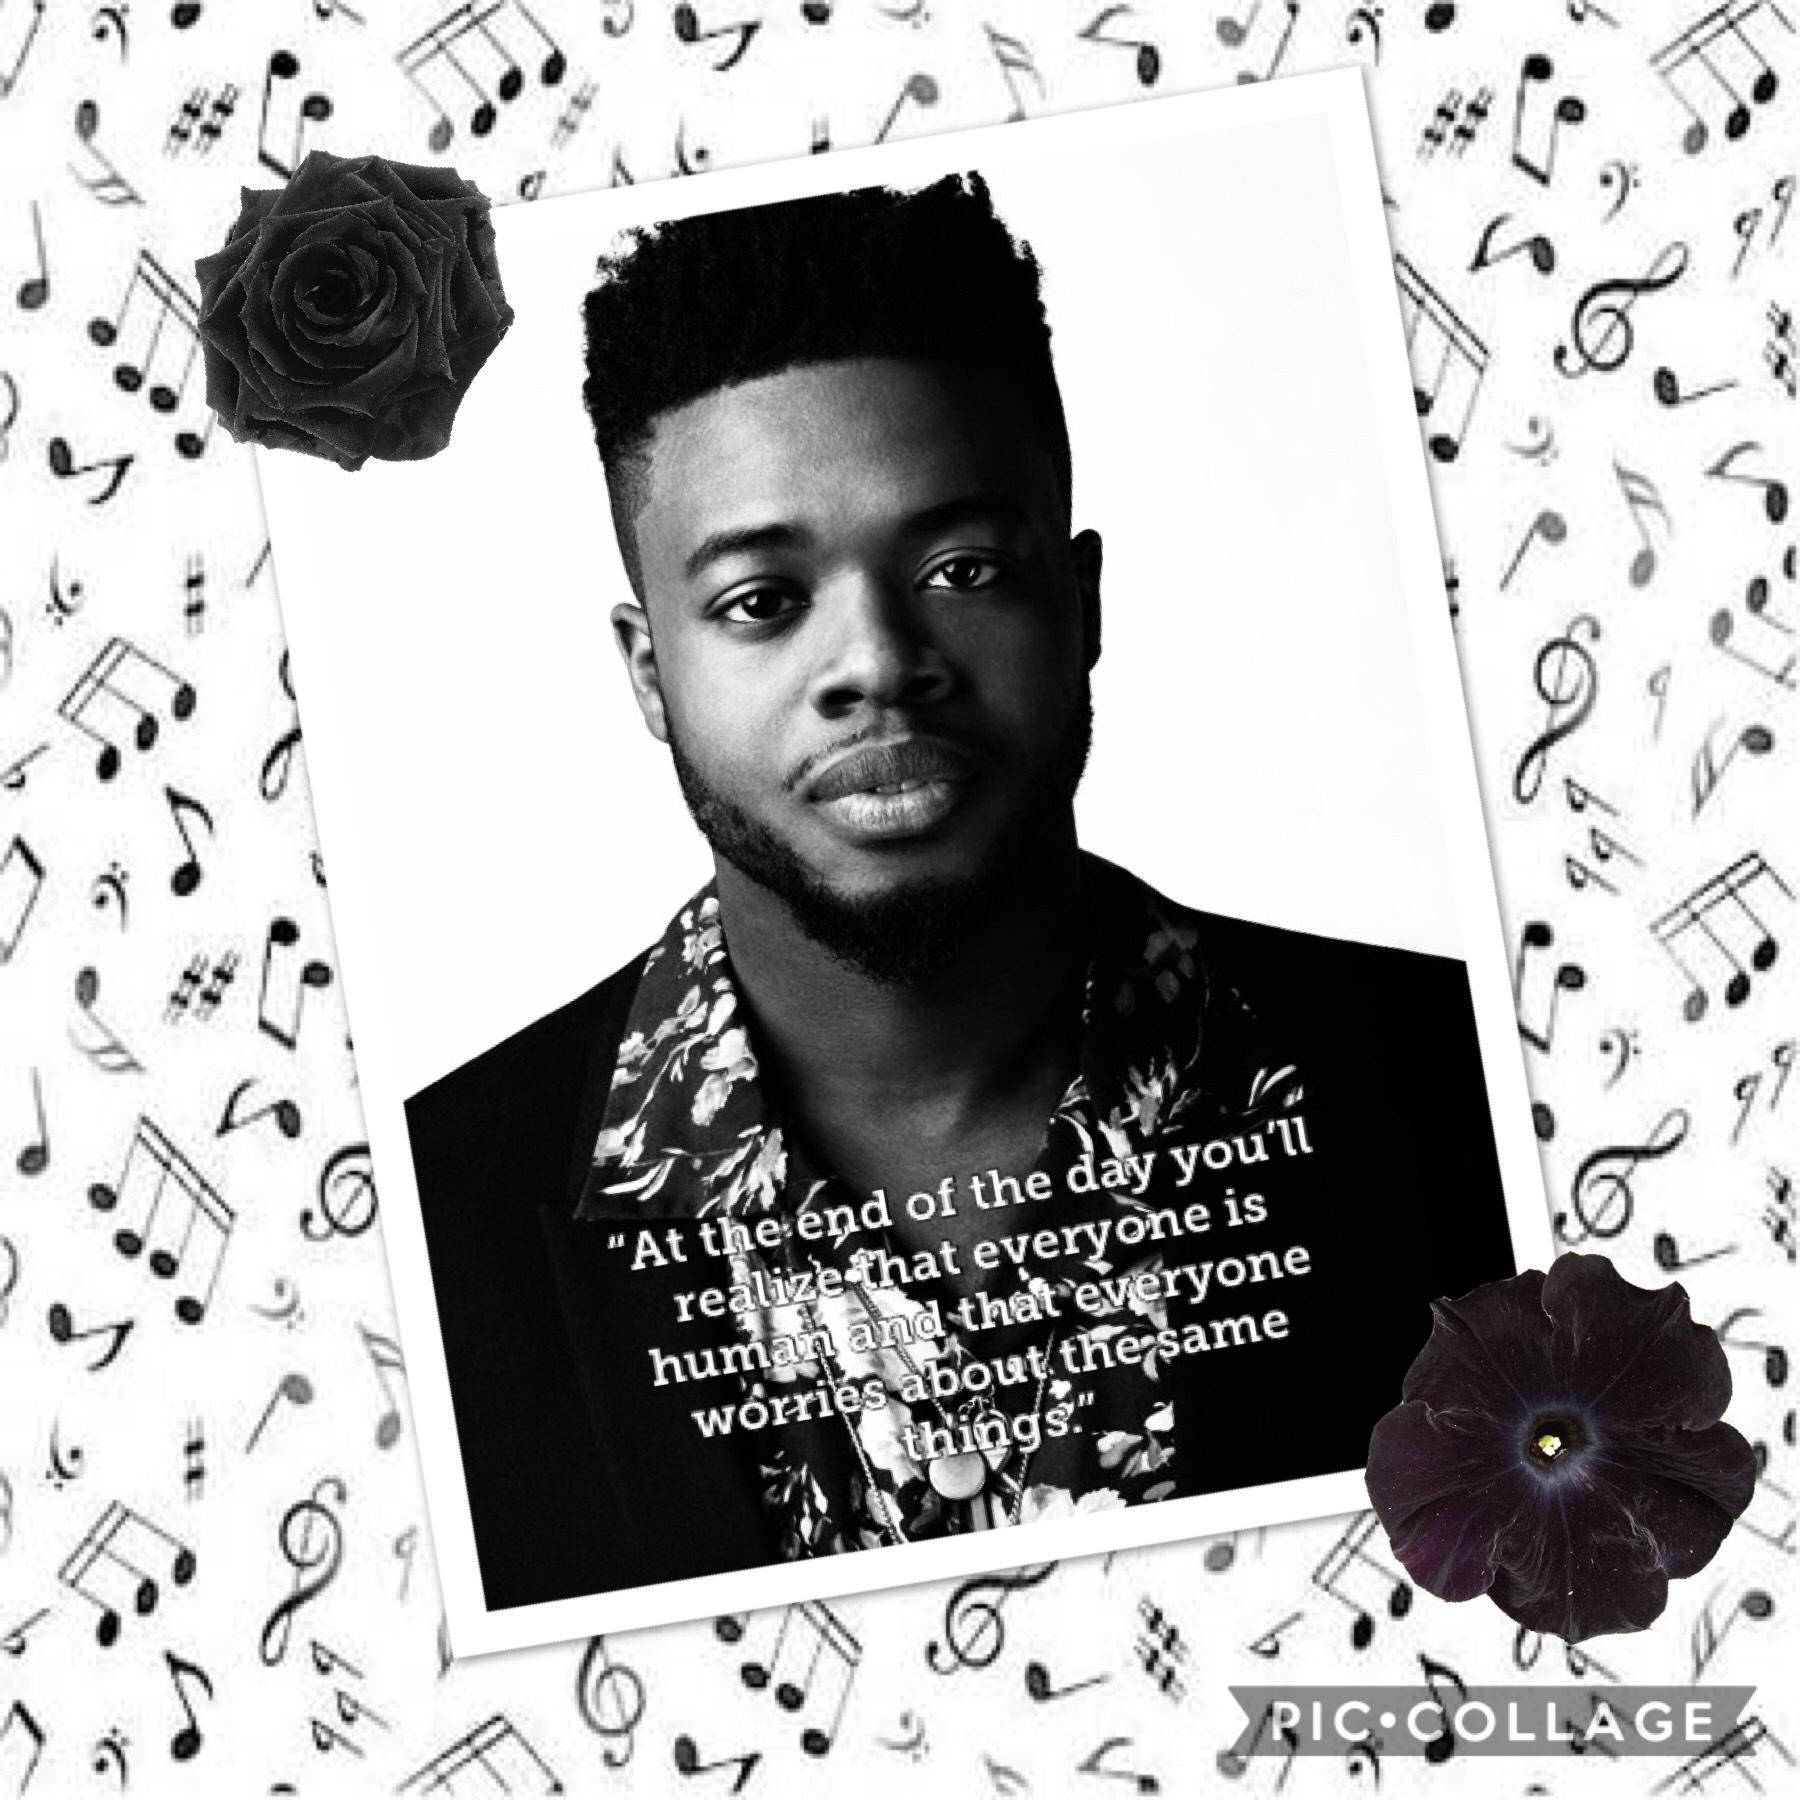 🖤Tap🖤

This one is for the Incredibly talented Kevin Olusola. He is not only a member of Pentatonix but has his own solo career as well. He can sing, beatbox, play cello, and is fluent in Chinese. He’s so talented and amazing.